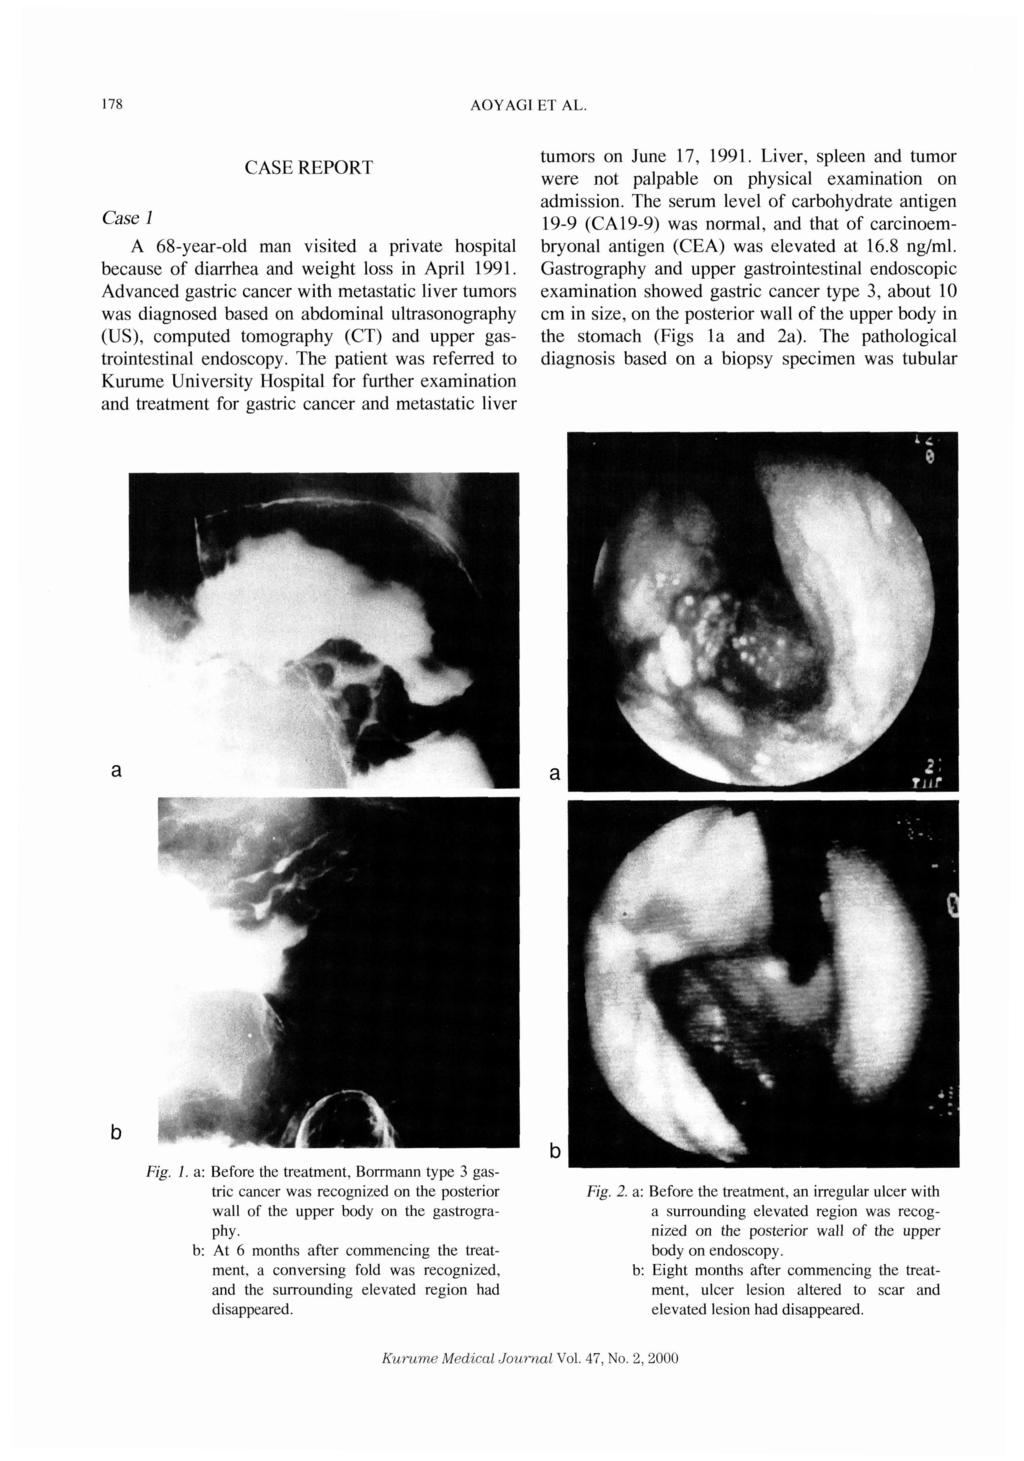 178 AOYAGI CASE REPORT Case 1 A 68-year-old man visited a private hospital because of diarrhea and weight loss in April 1991.